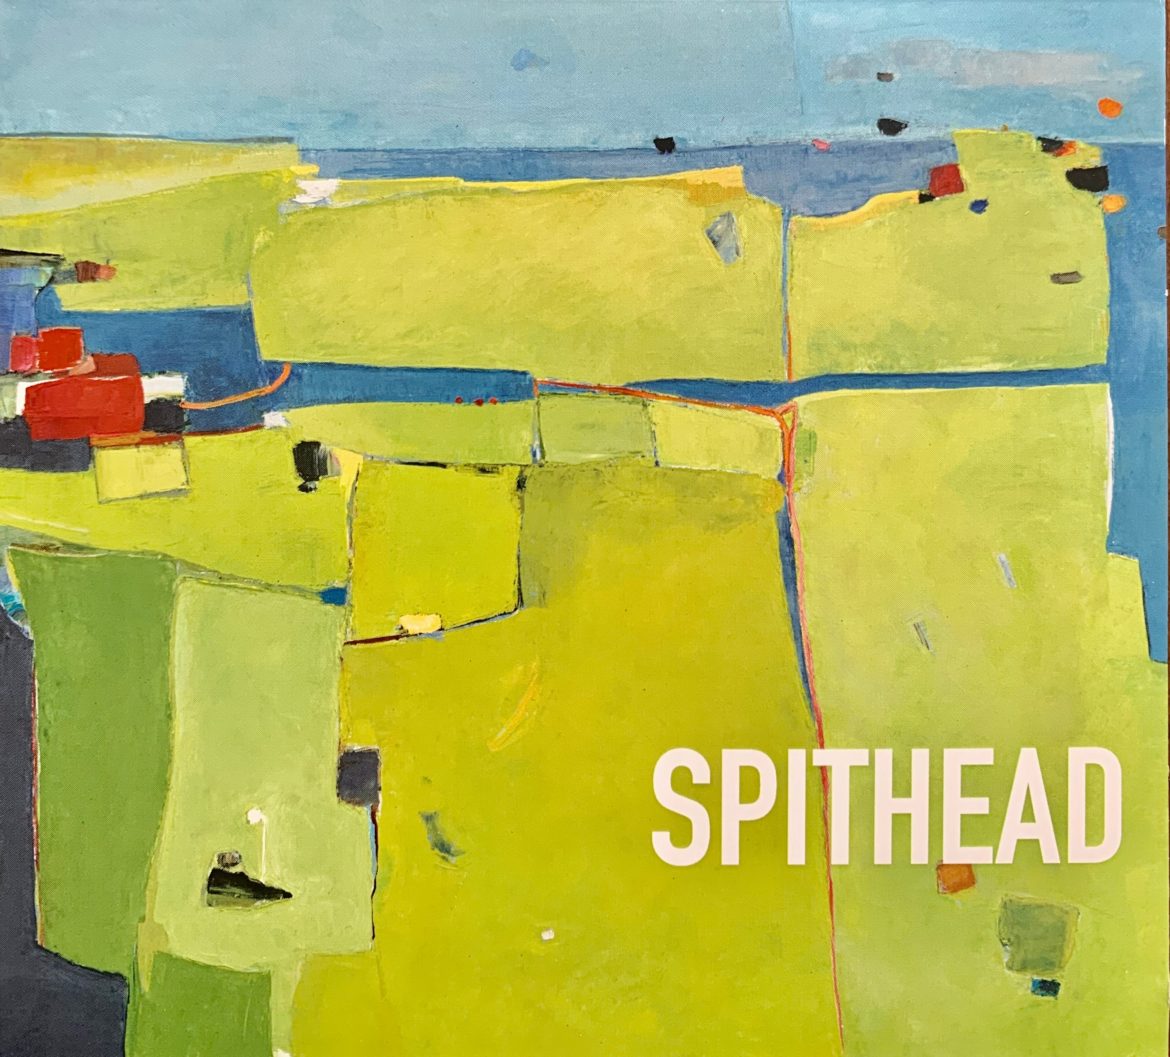 SPITHEAD leaving us speechless with their new  Album ‘SPITHEAD’